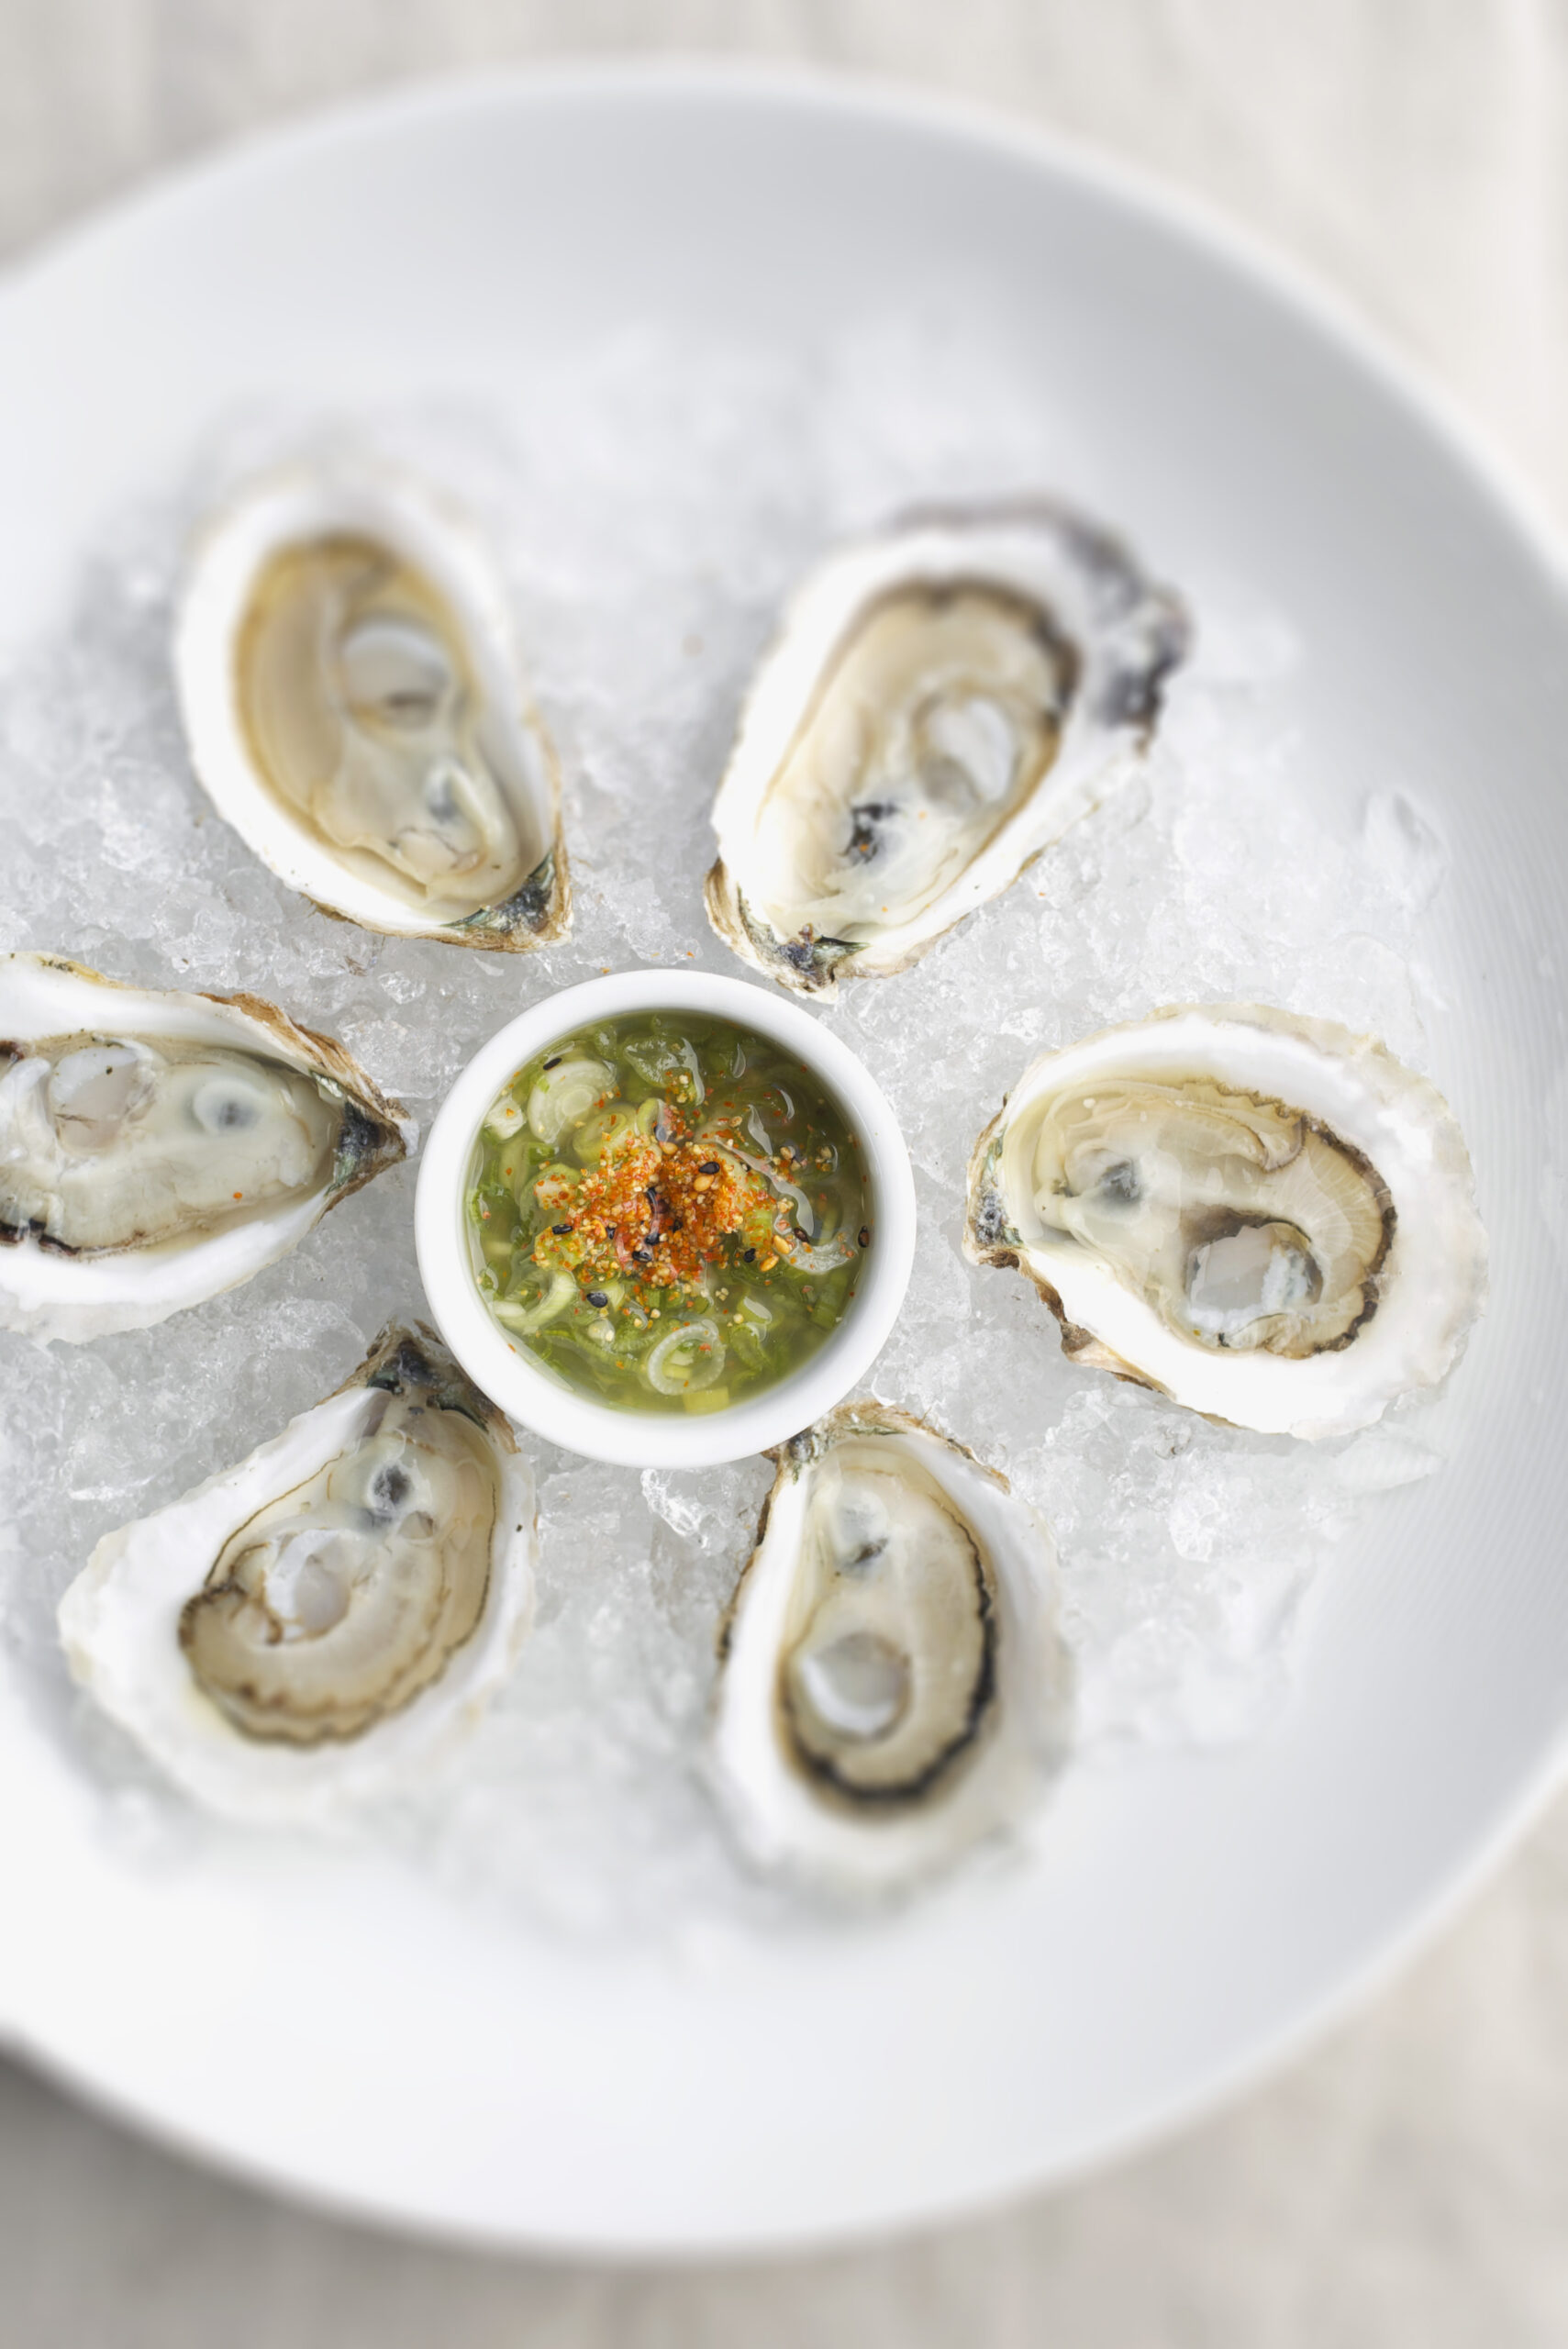 Hogs Neck Bay oysters on the half shell at The 1770 House. ROBYN LEA